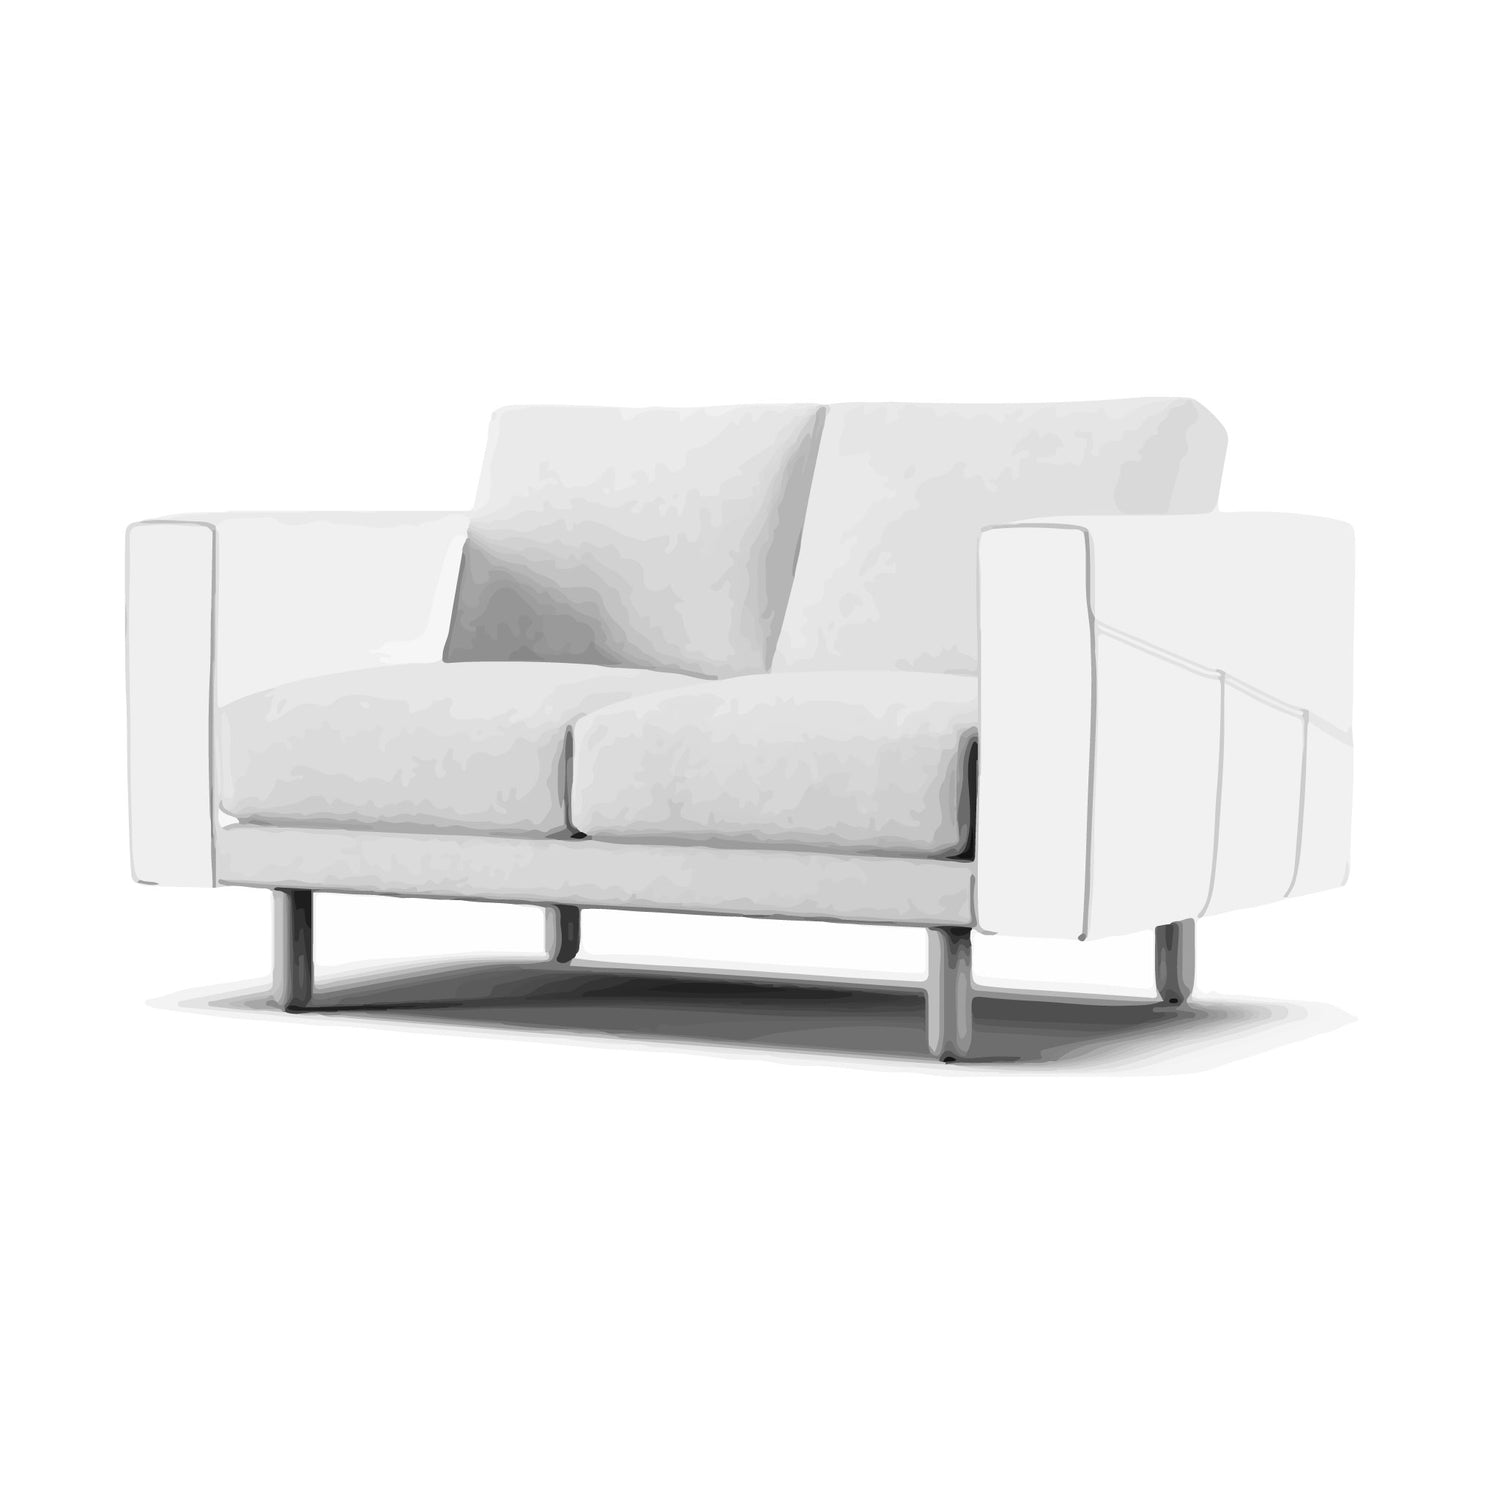 Norsborg 2 Seater Sofa Section Only